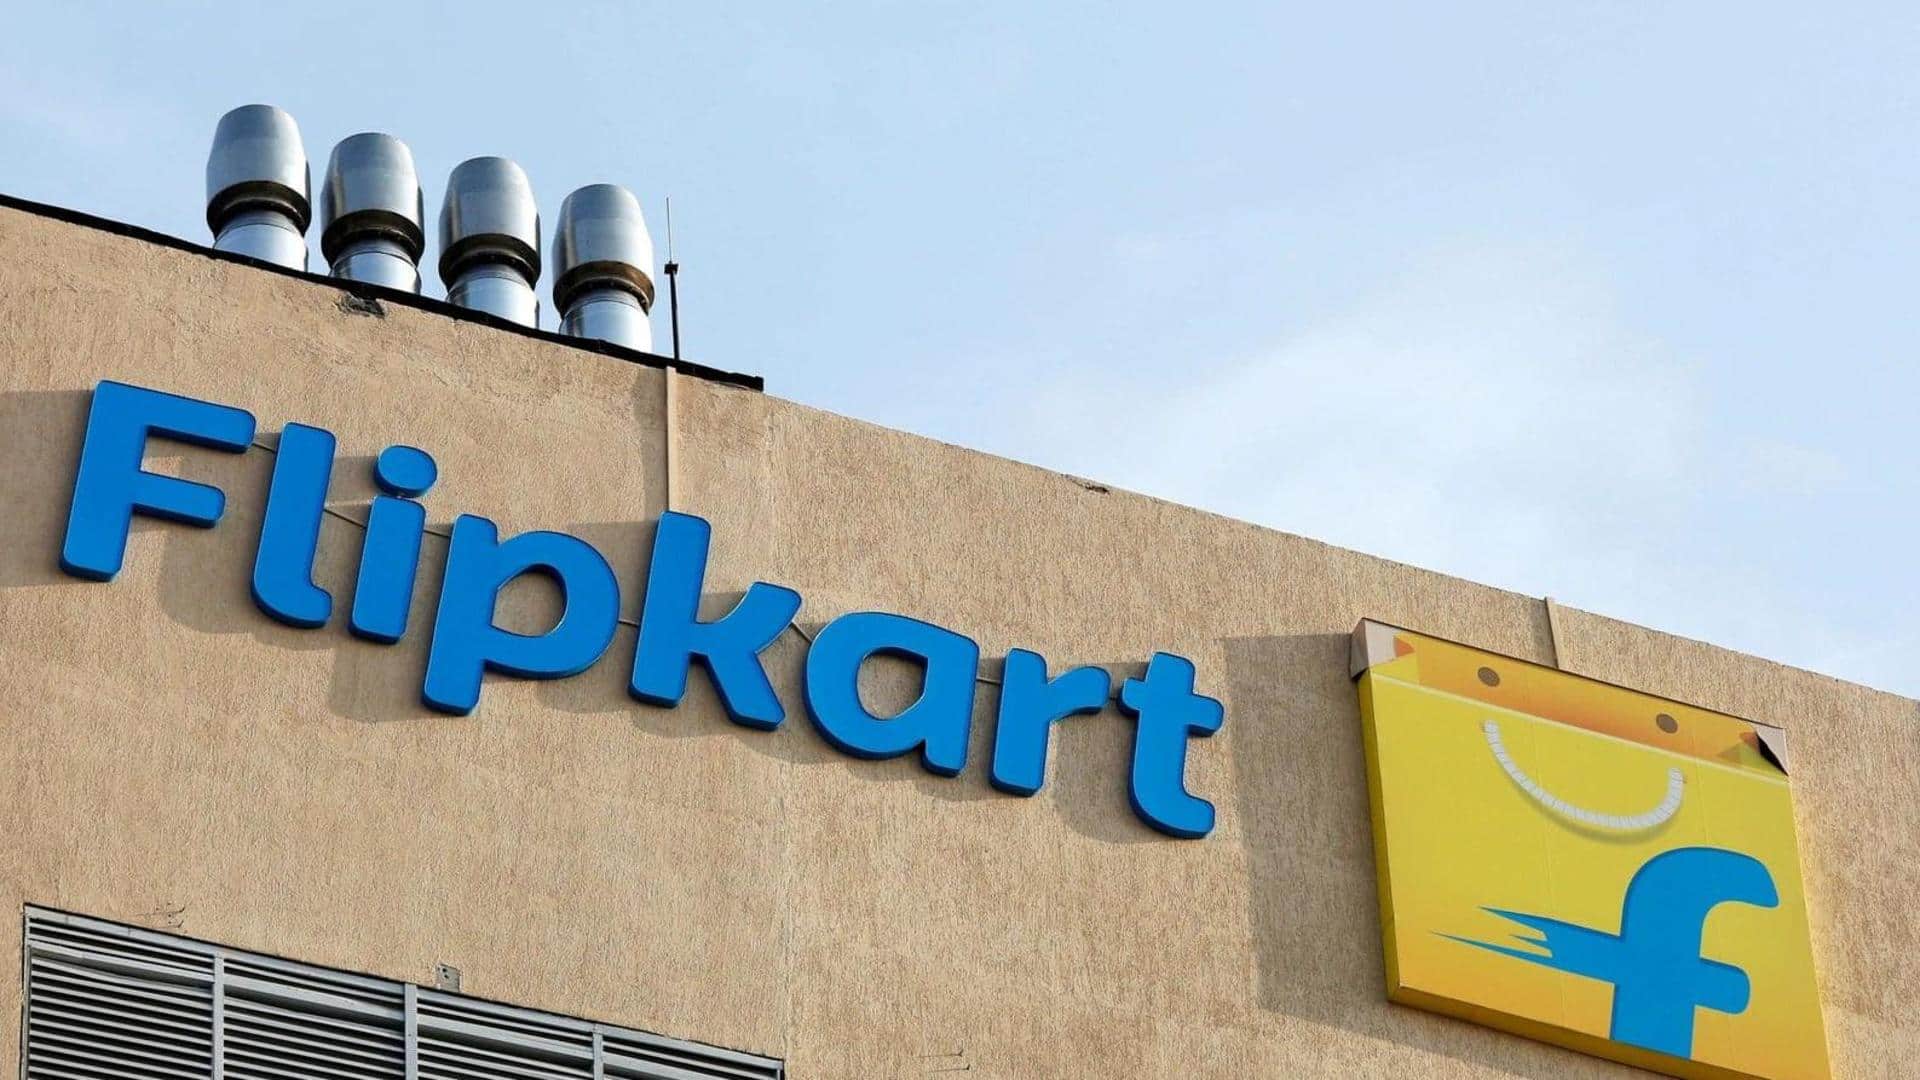 Flipkart starts crediting $700 million one-time payout to employees